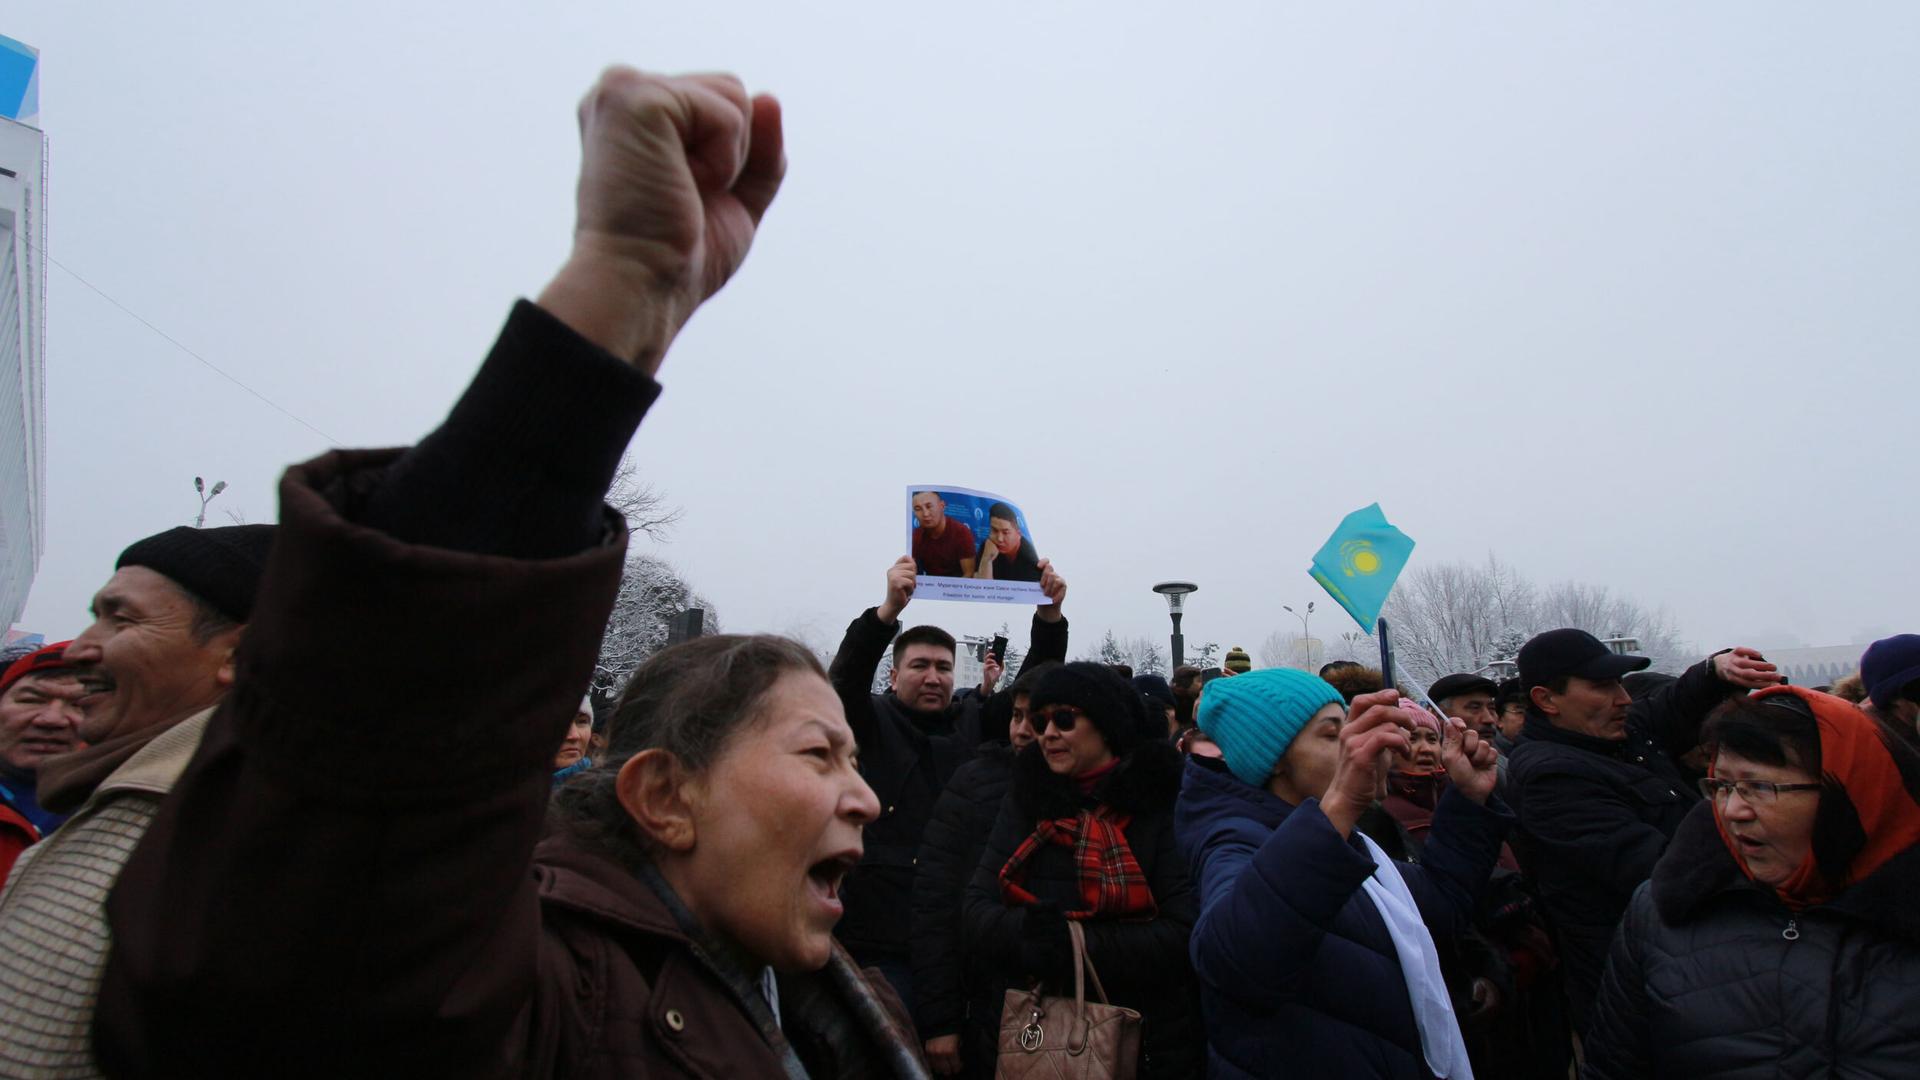 Kazakhs protest what they see as excessive expansion of Chinese influence in Kazakhstan, including new Silk Road investments, in Almaty, Kazakhstan, Dec. 2019. 